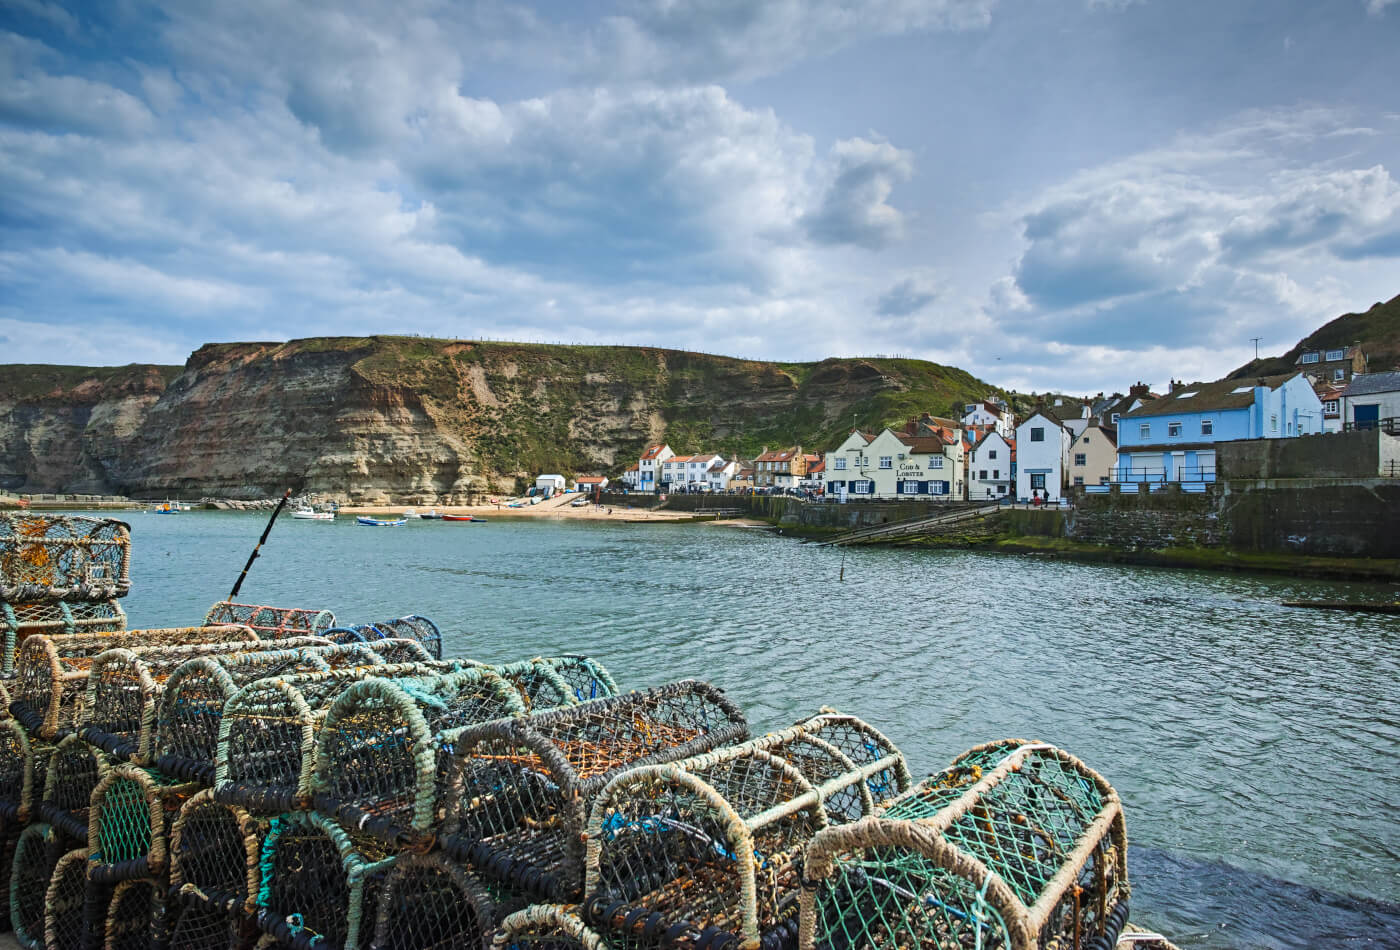 Lobster pots lining the shores of Staithes